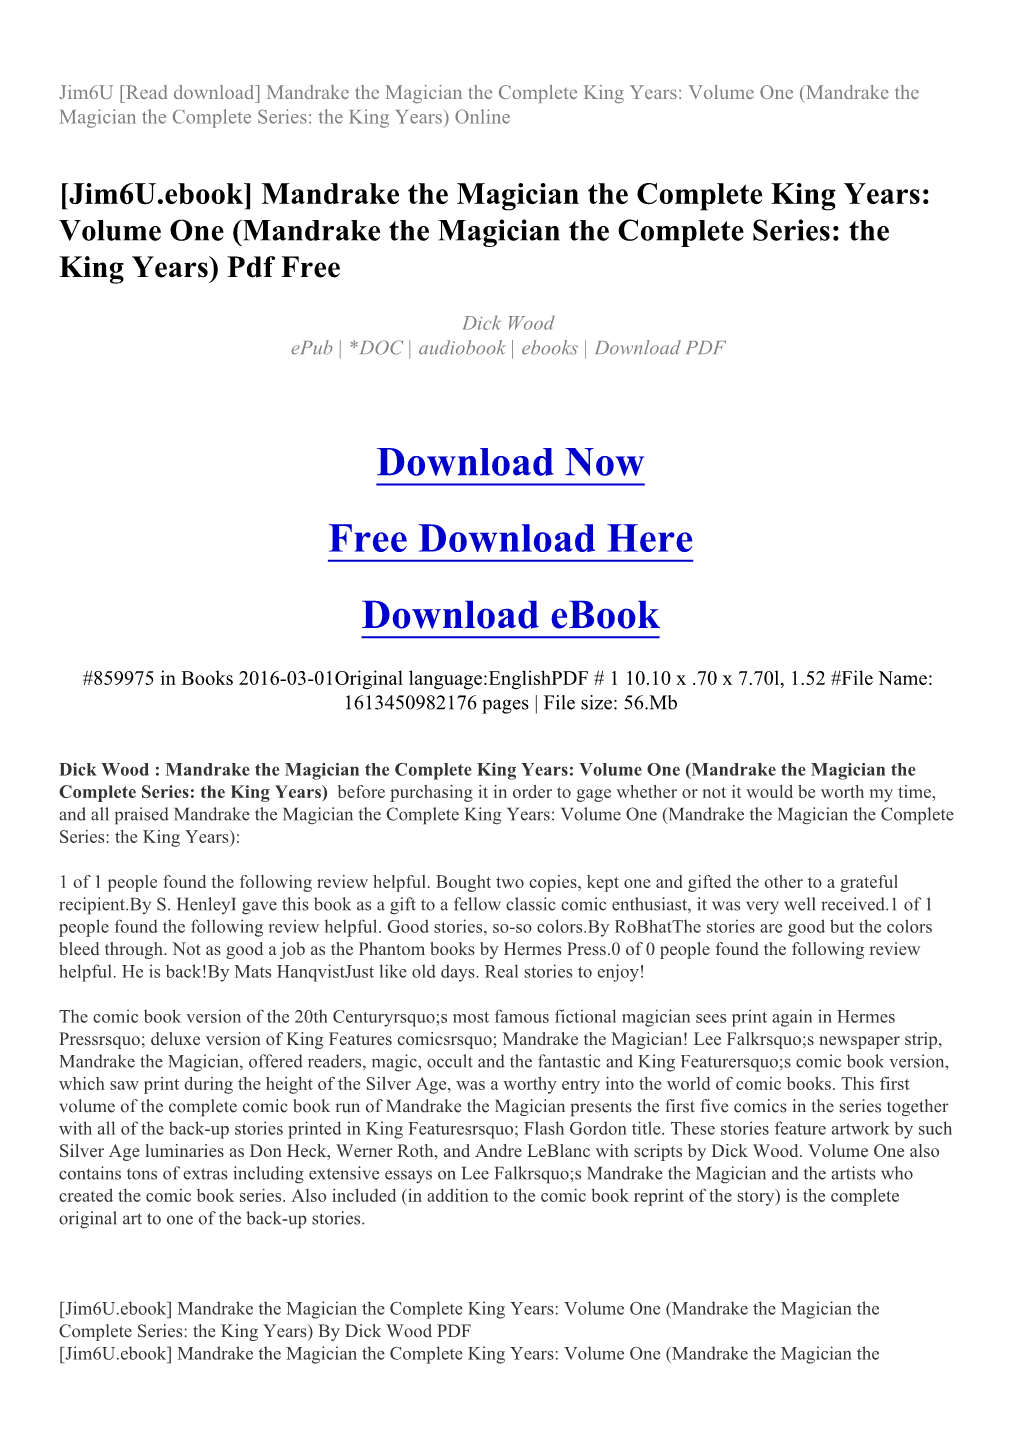 Jim6u [Read Download] Mandrake the Magician the Complete King Years: Volume One (Mandrake the Magician the Complete Series: the King Years) Online